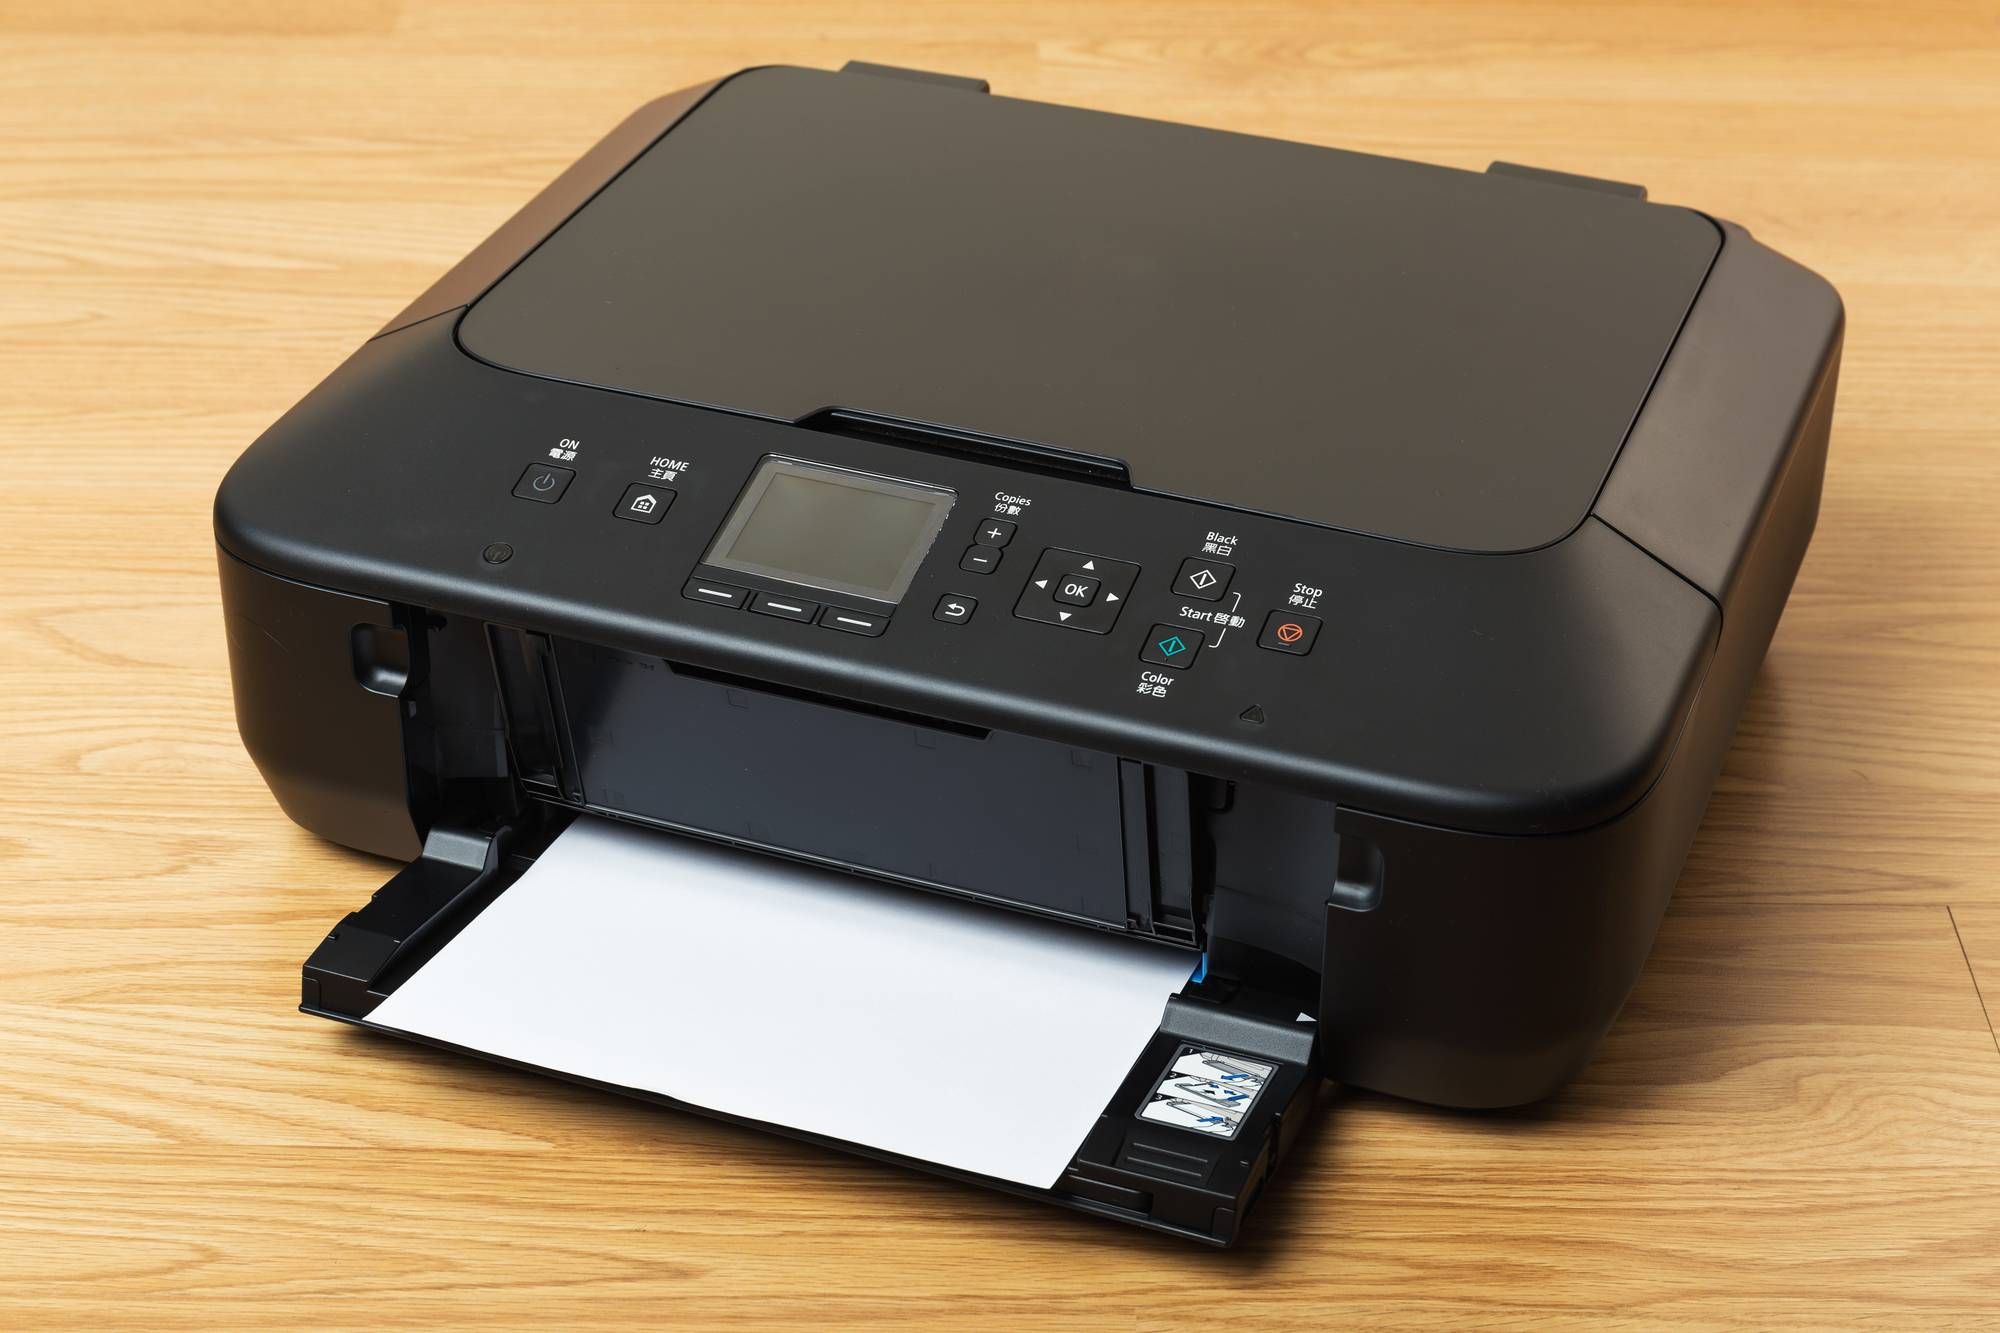 Epson printer software allegedly makes it impossible for consumers to use third party printer ink.